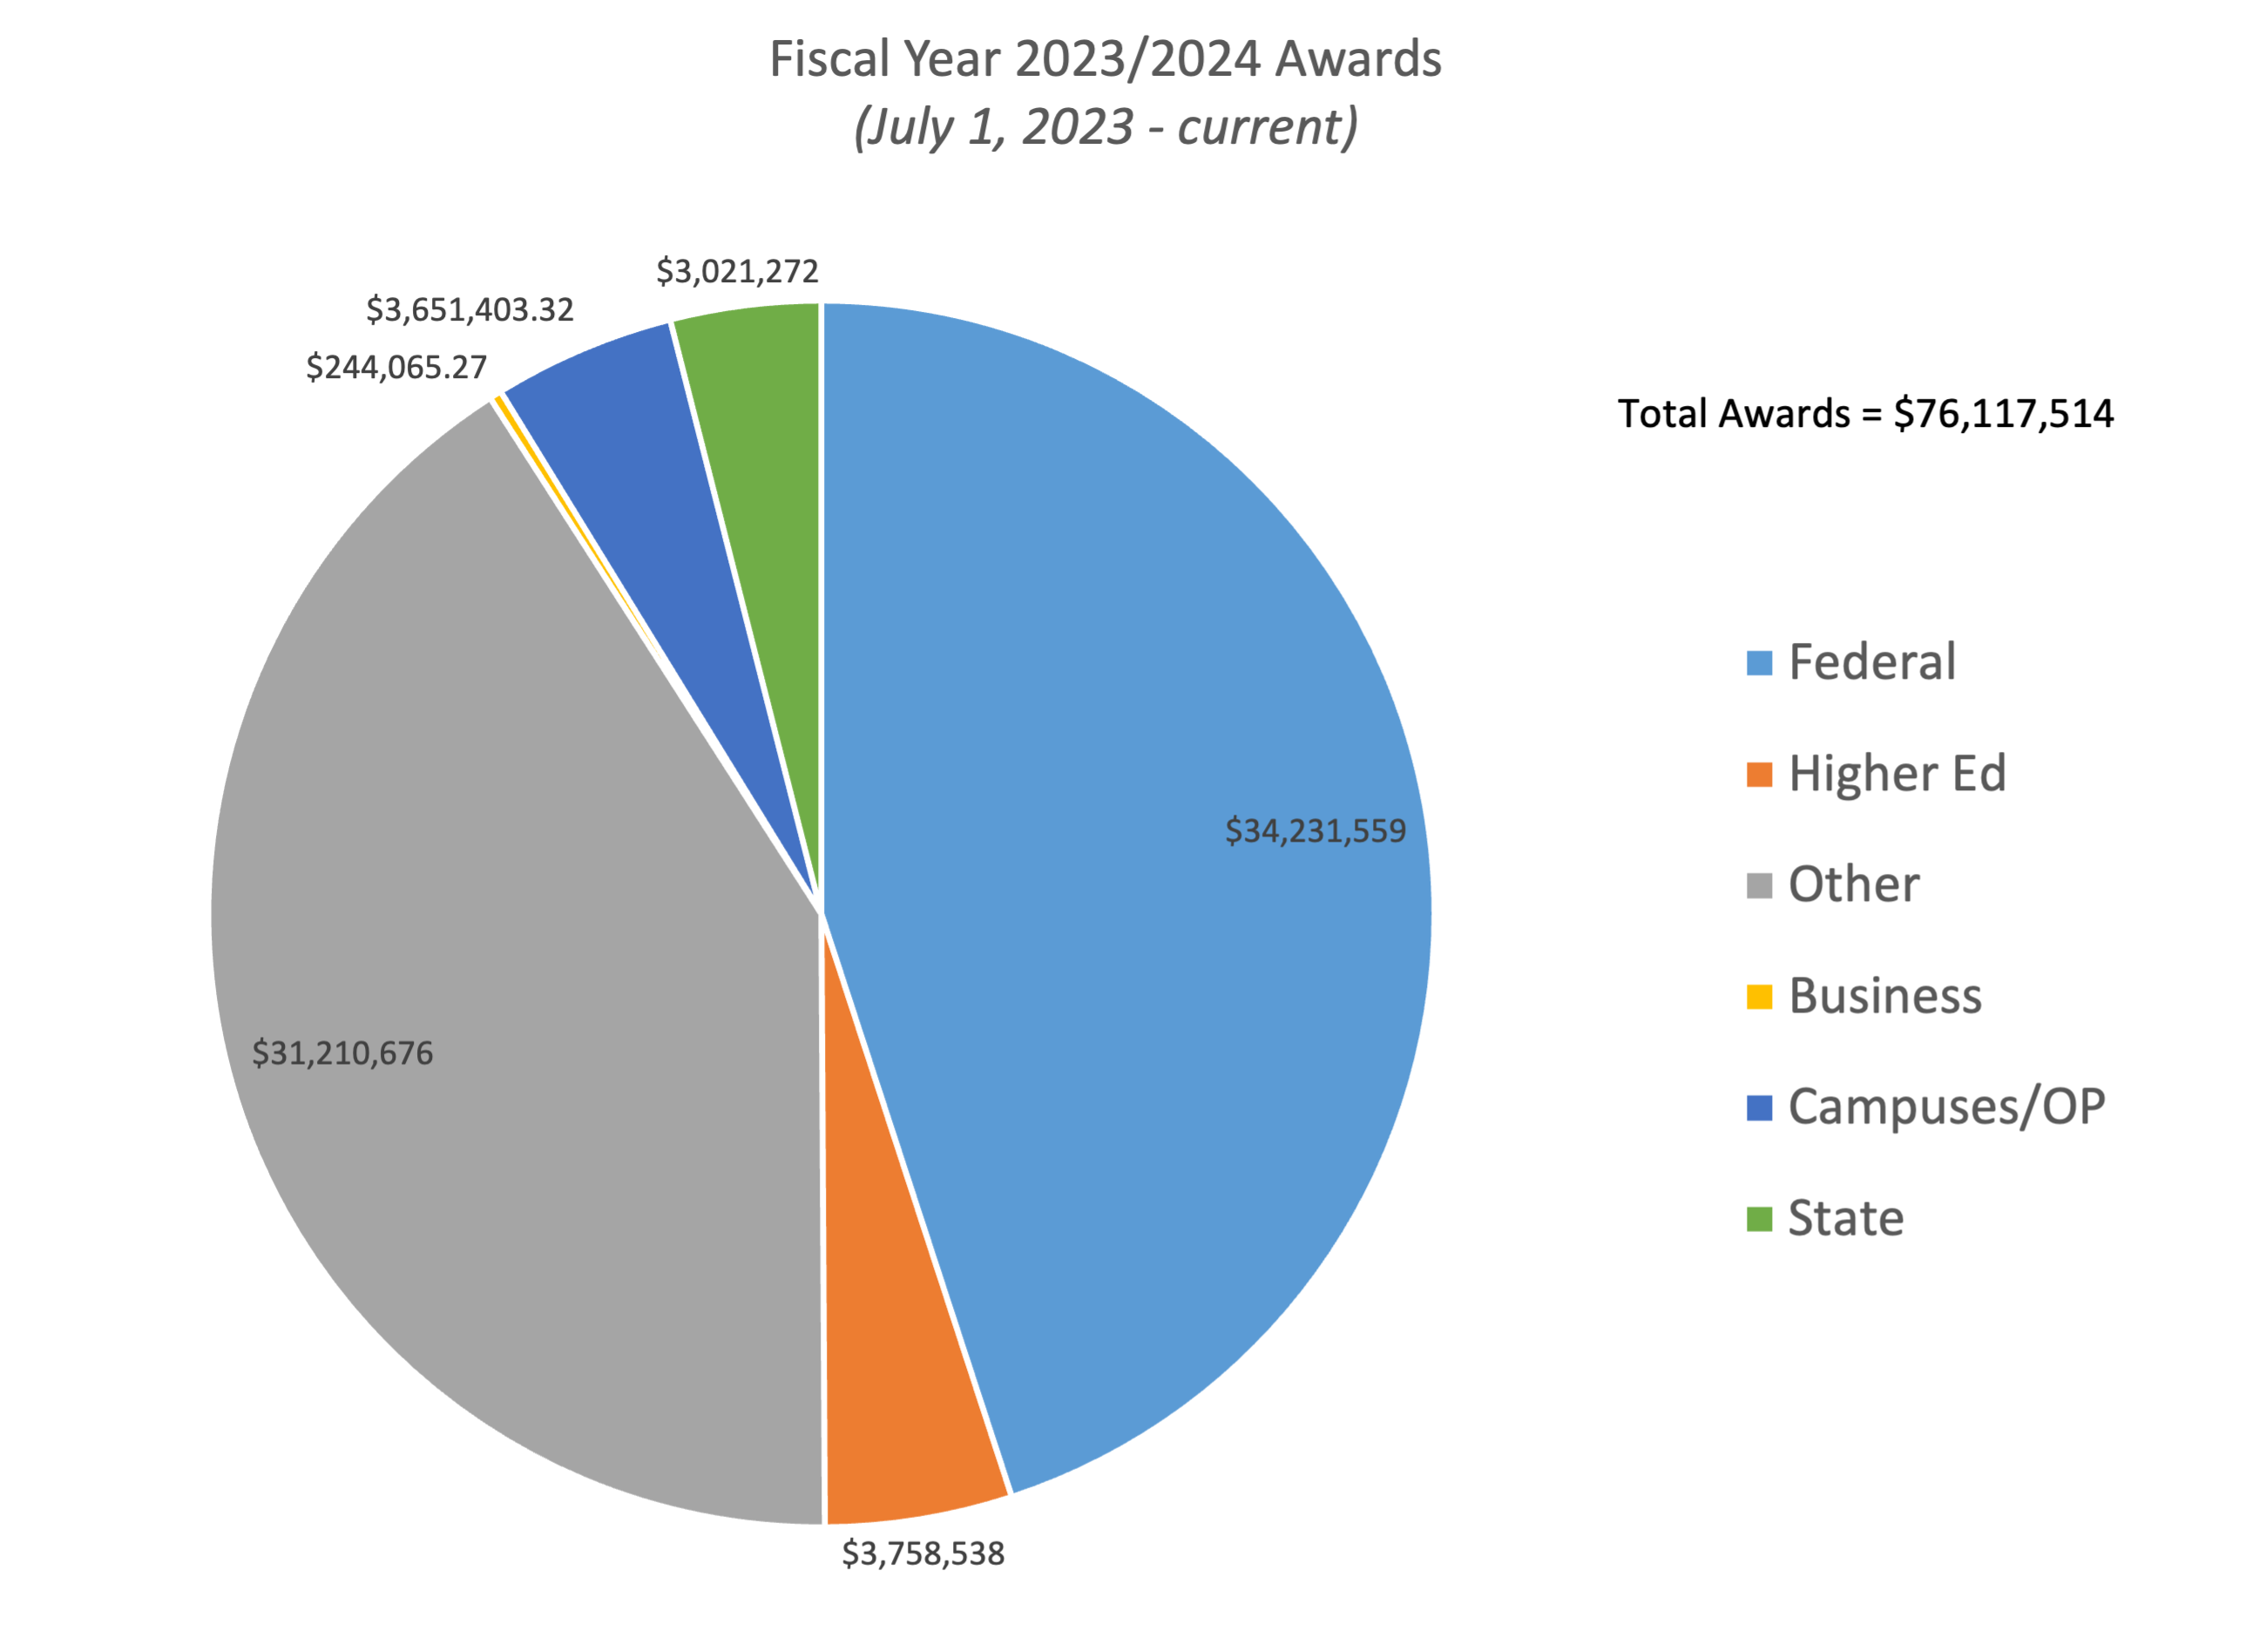 Fiscal Year 2023-2024 Awards pie chart 